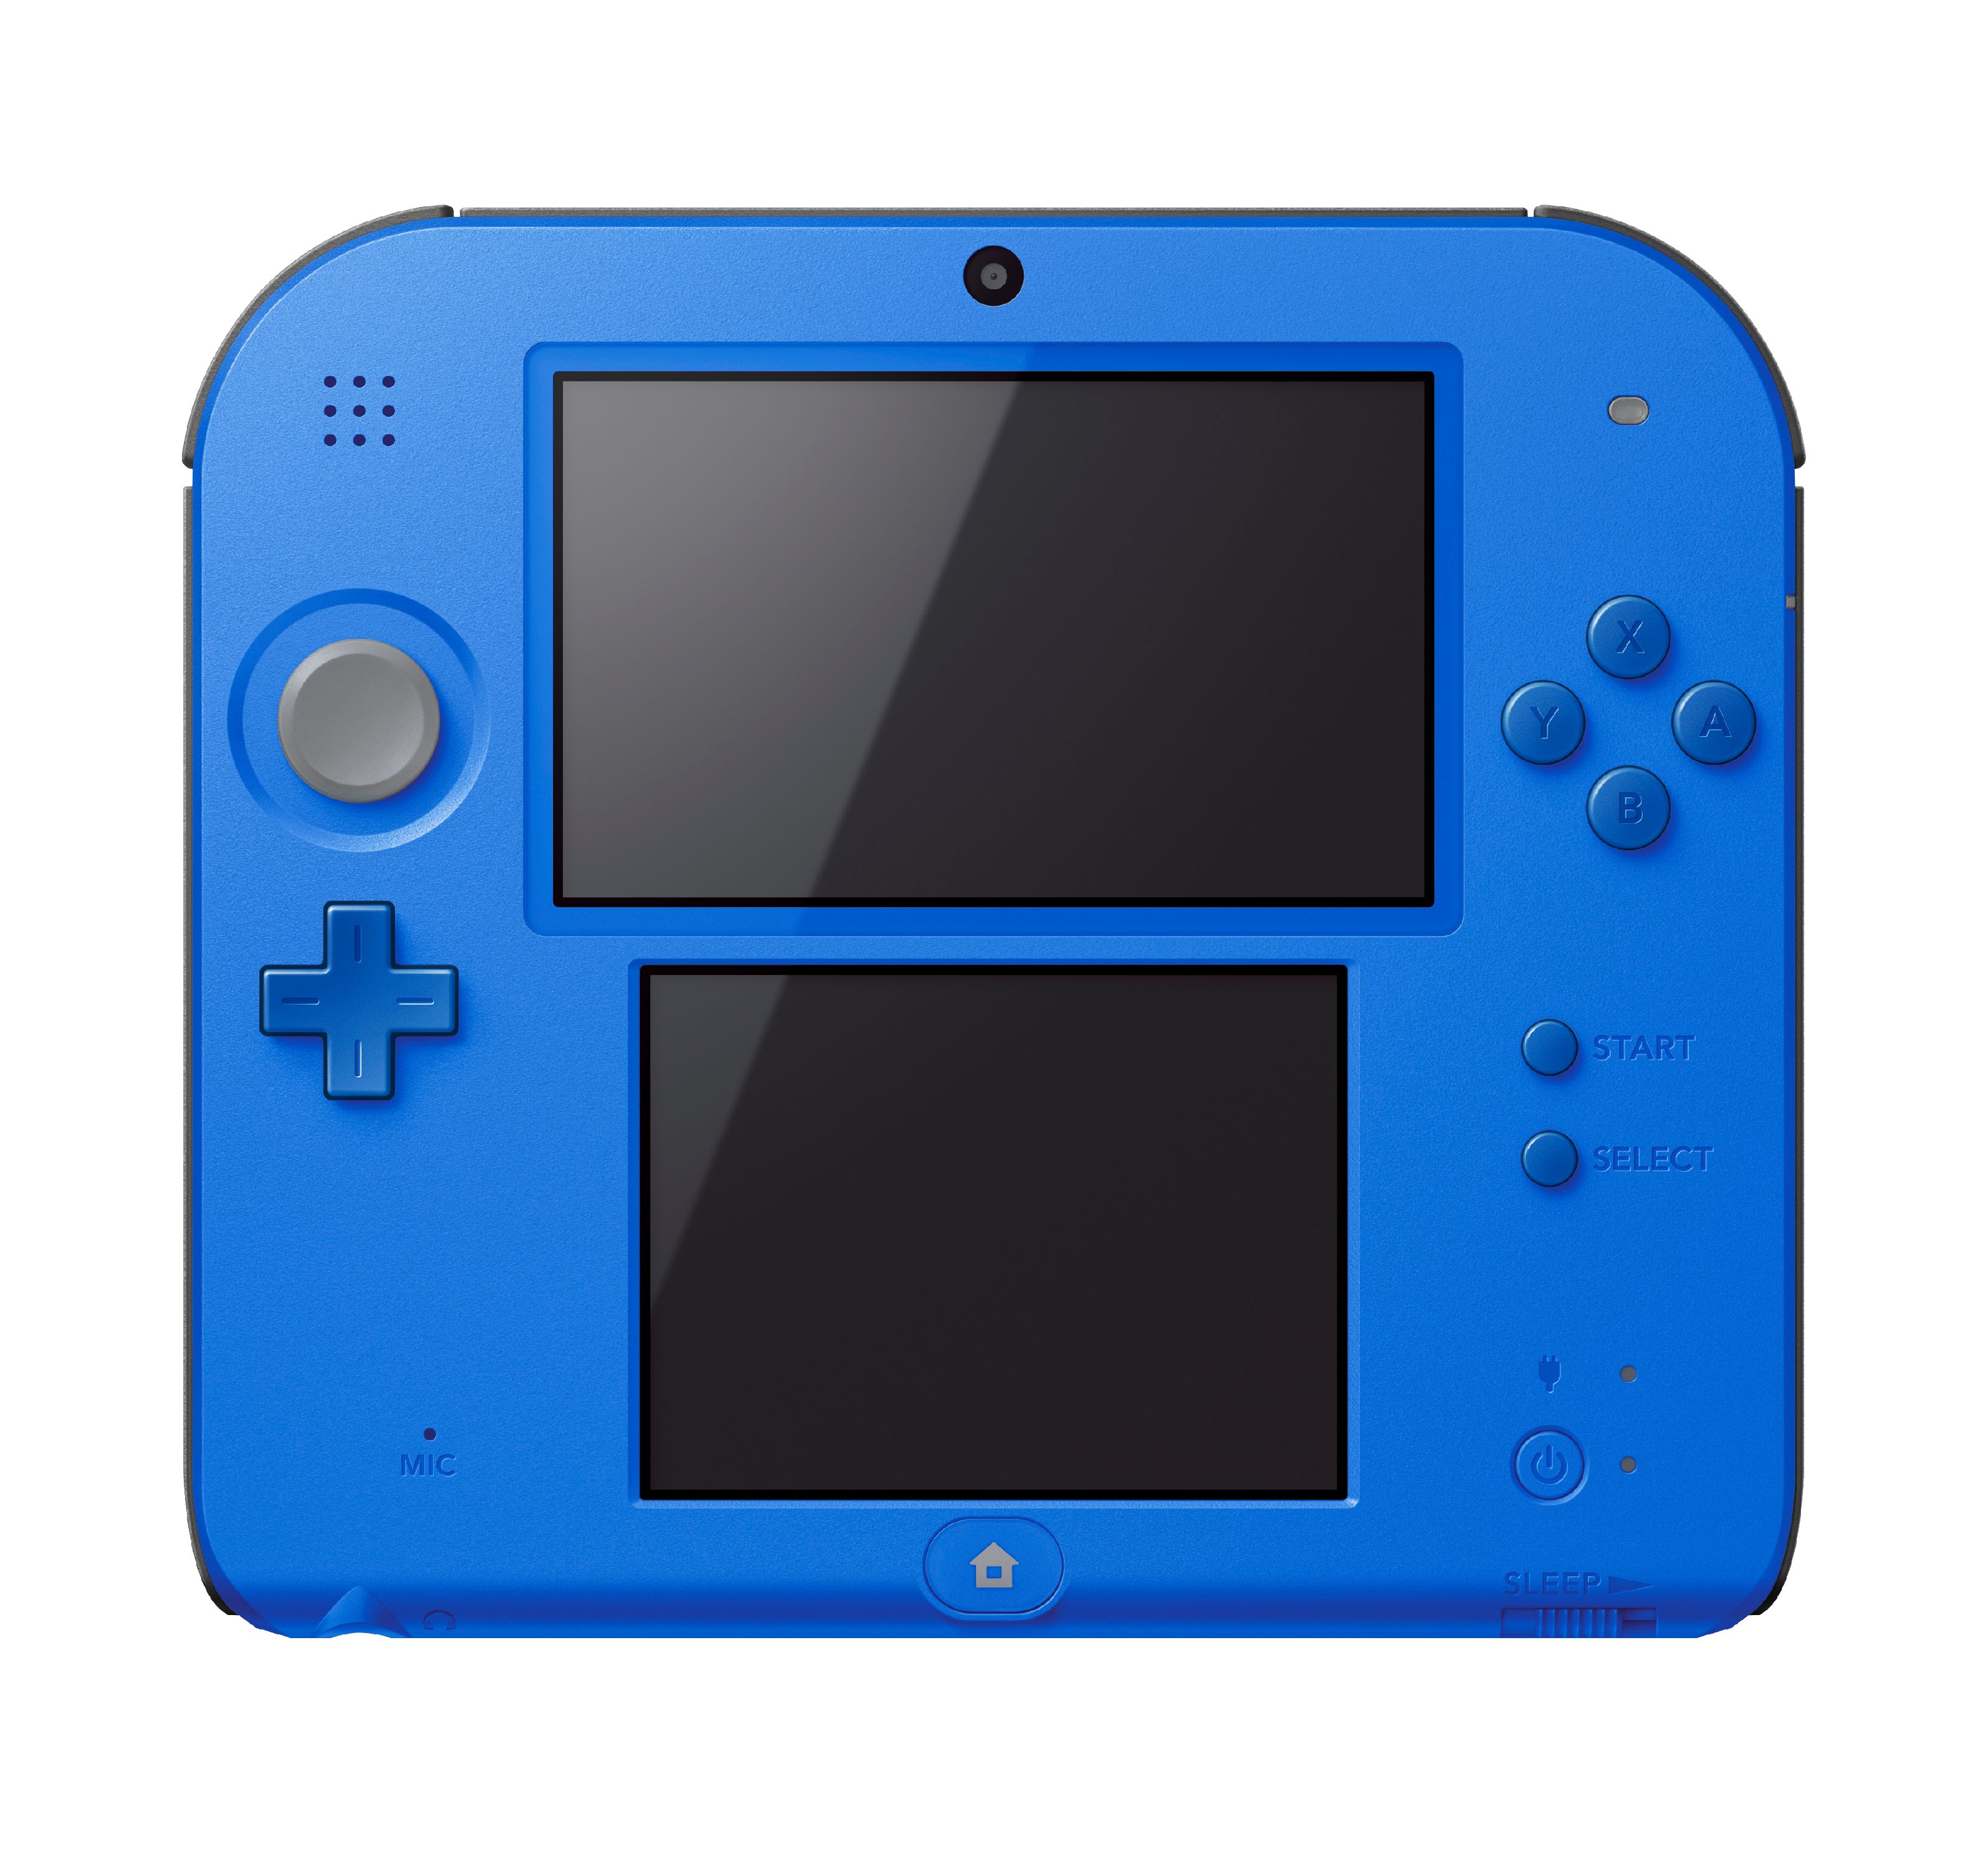 Nintendo 2DS System with New Super Mario 2, Blue - image 5 of 6